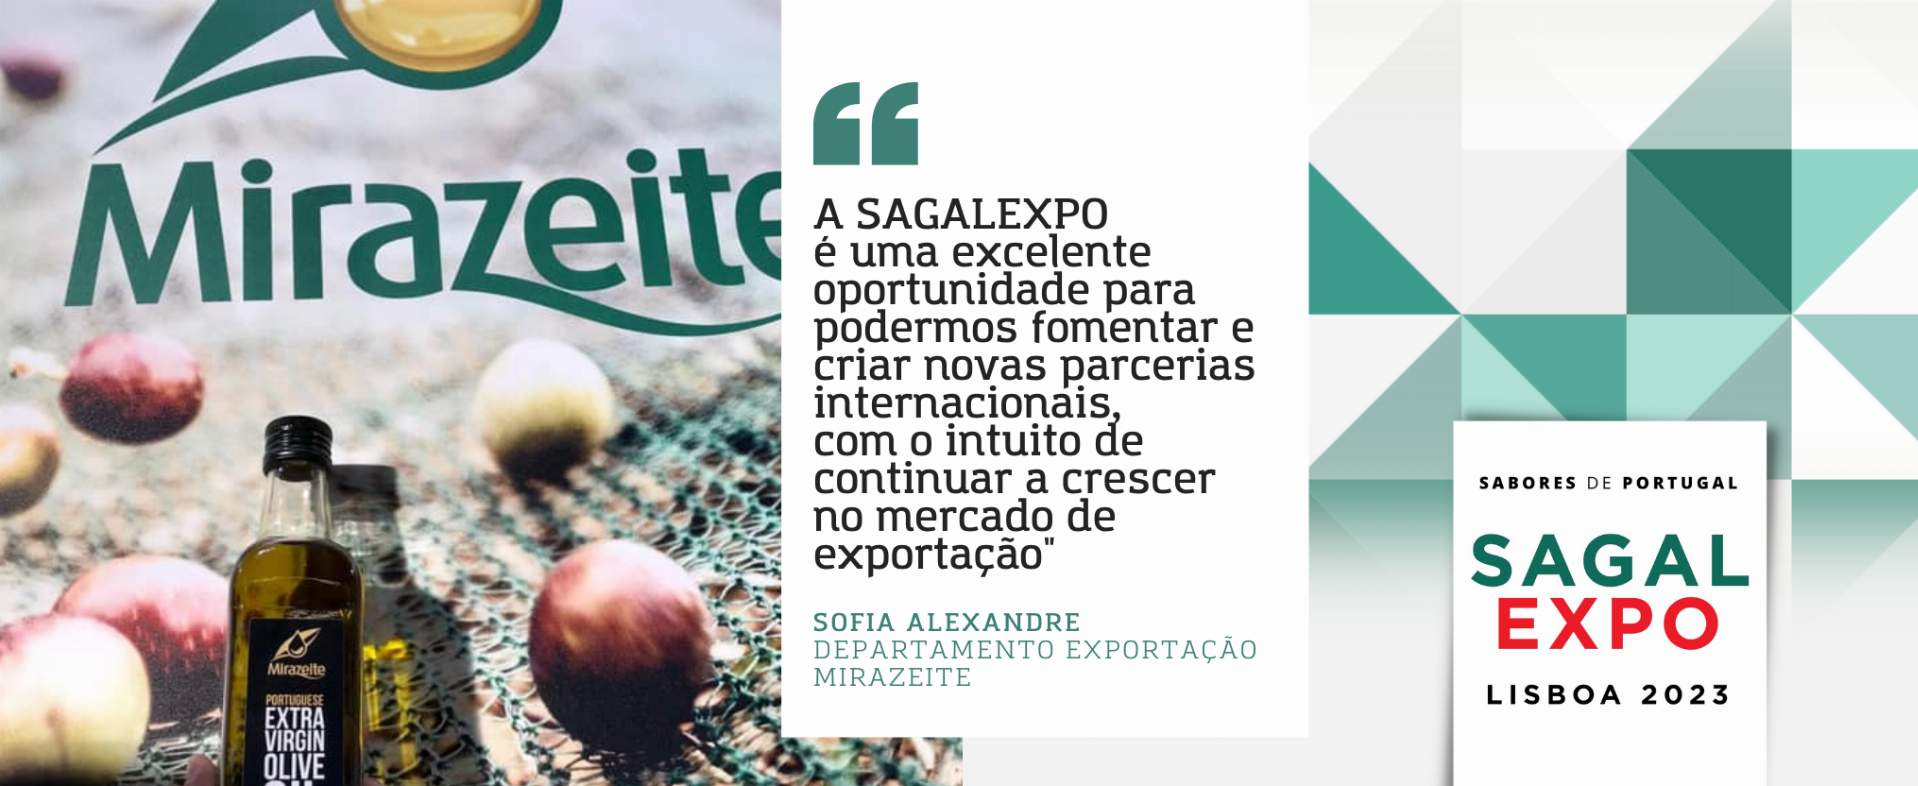 Mirazeite: "SAGALEXPO is an excellent opportunity for us to foster and create new international partnerships, in order to continue growing in the export market".